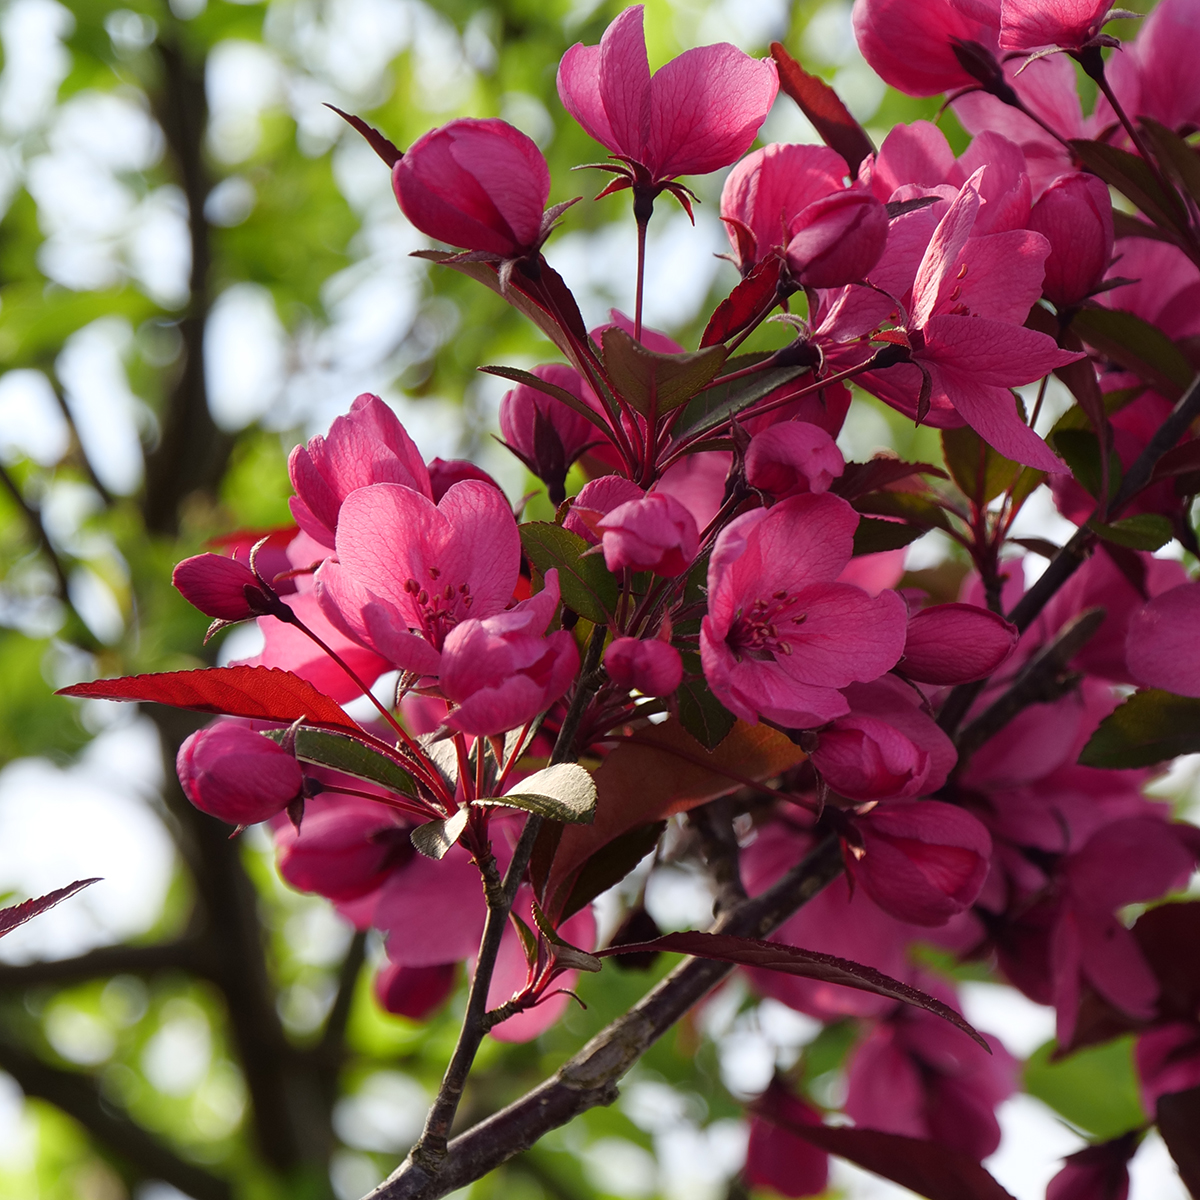 The lovely pink flowers of Show Time crabapple